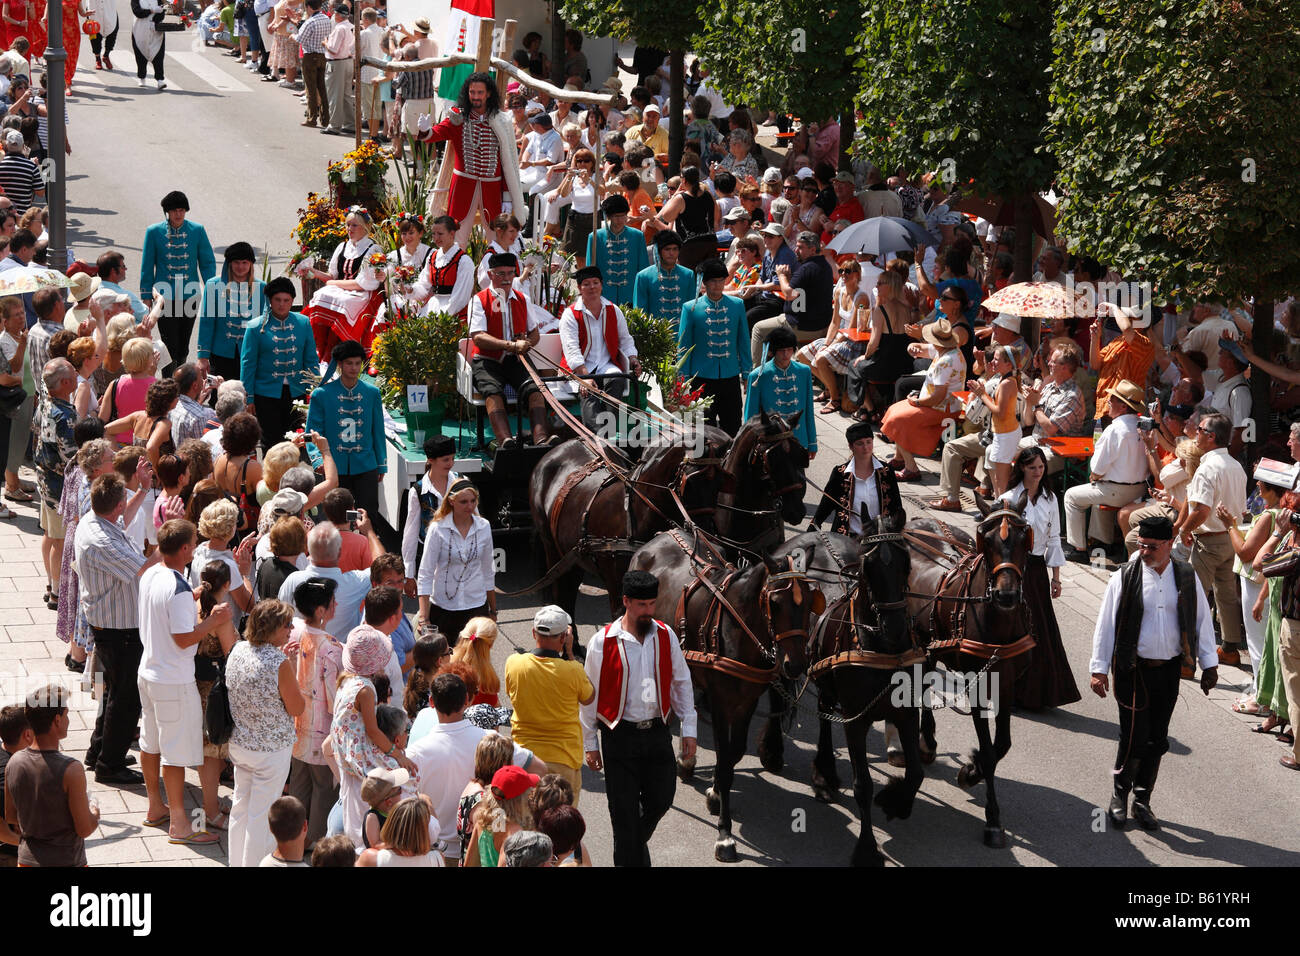 Historical parade, Fuerst Rákóczi on a five-in-hand carriage, Bad Kissingen, Rhoen, Lower Franconia, Bavaria, Germany, Europe Stock Photo